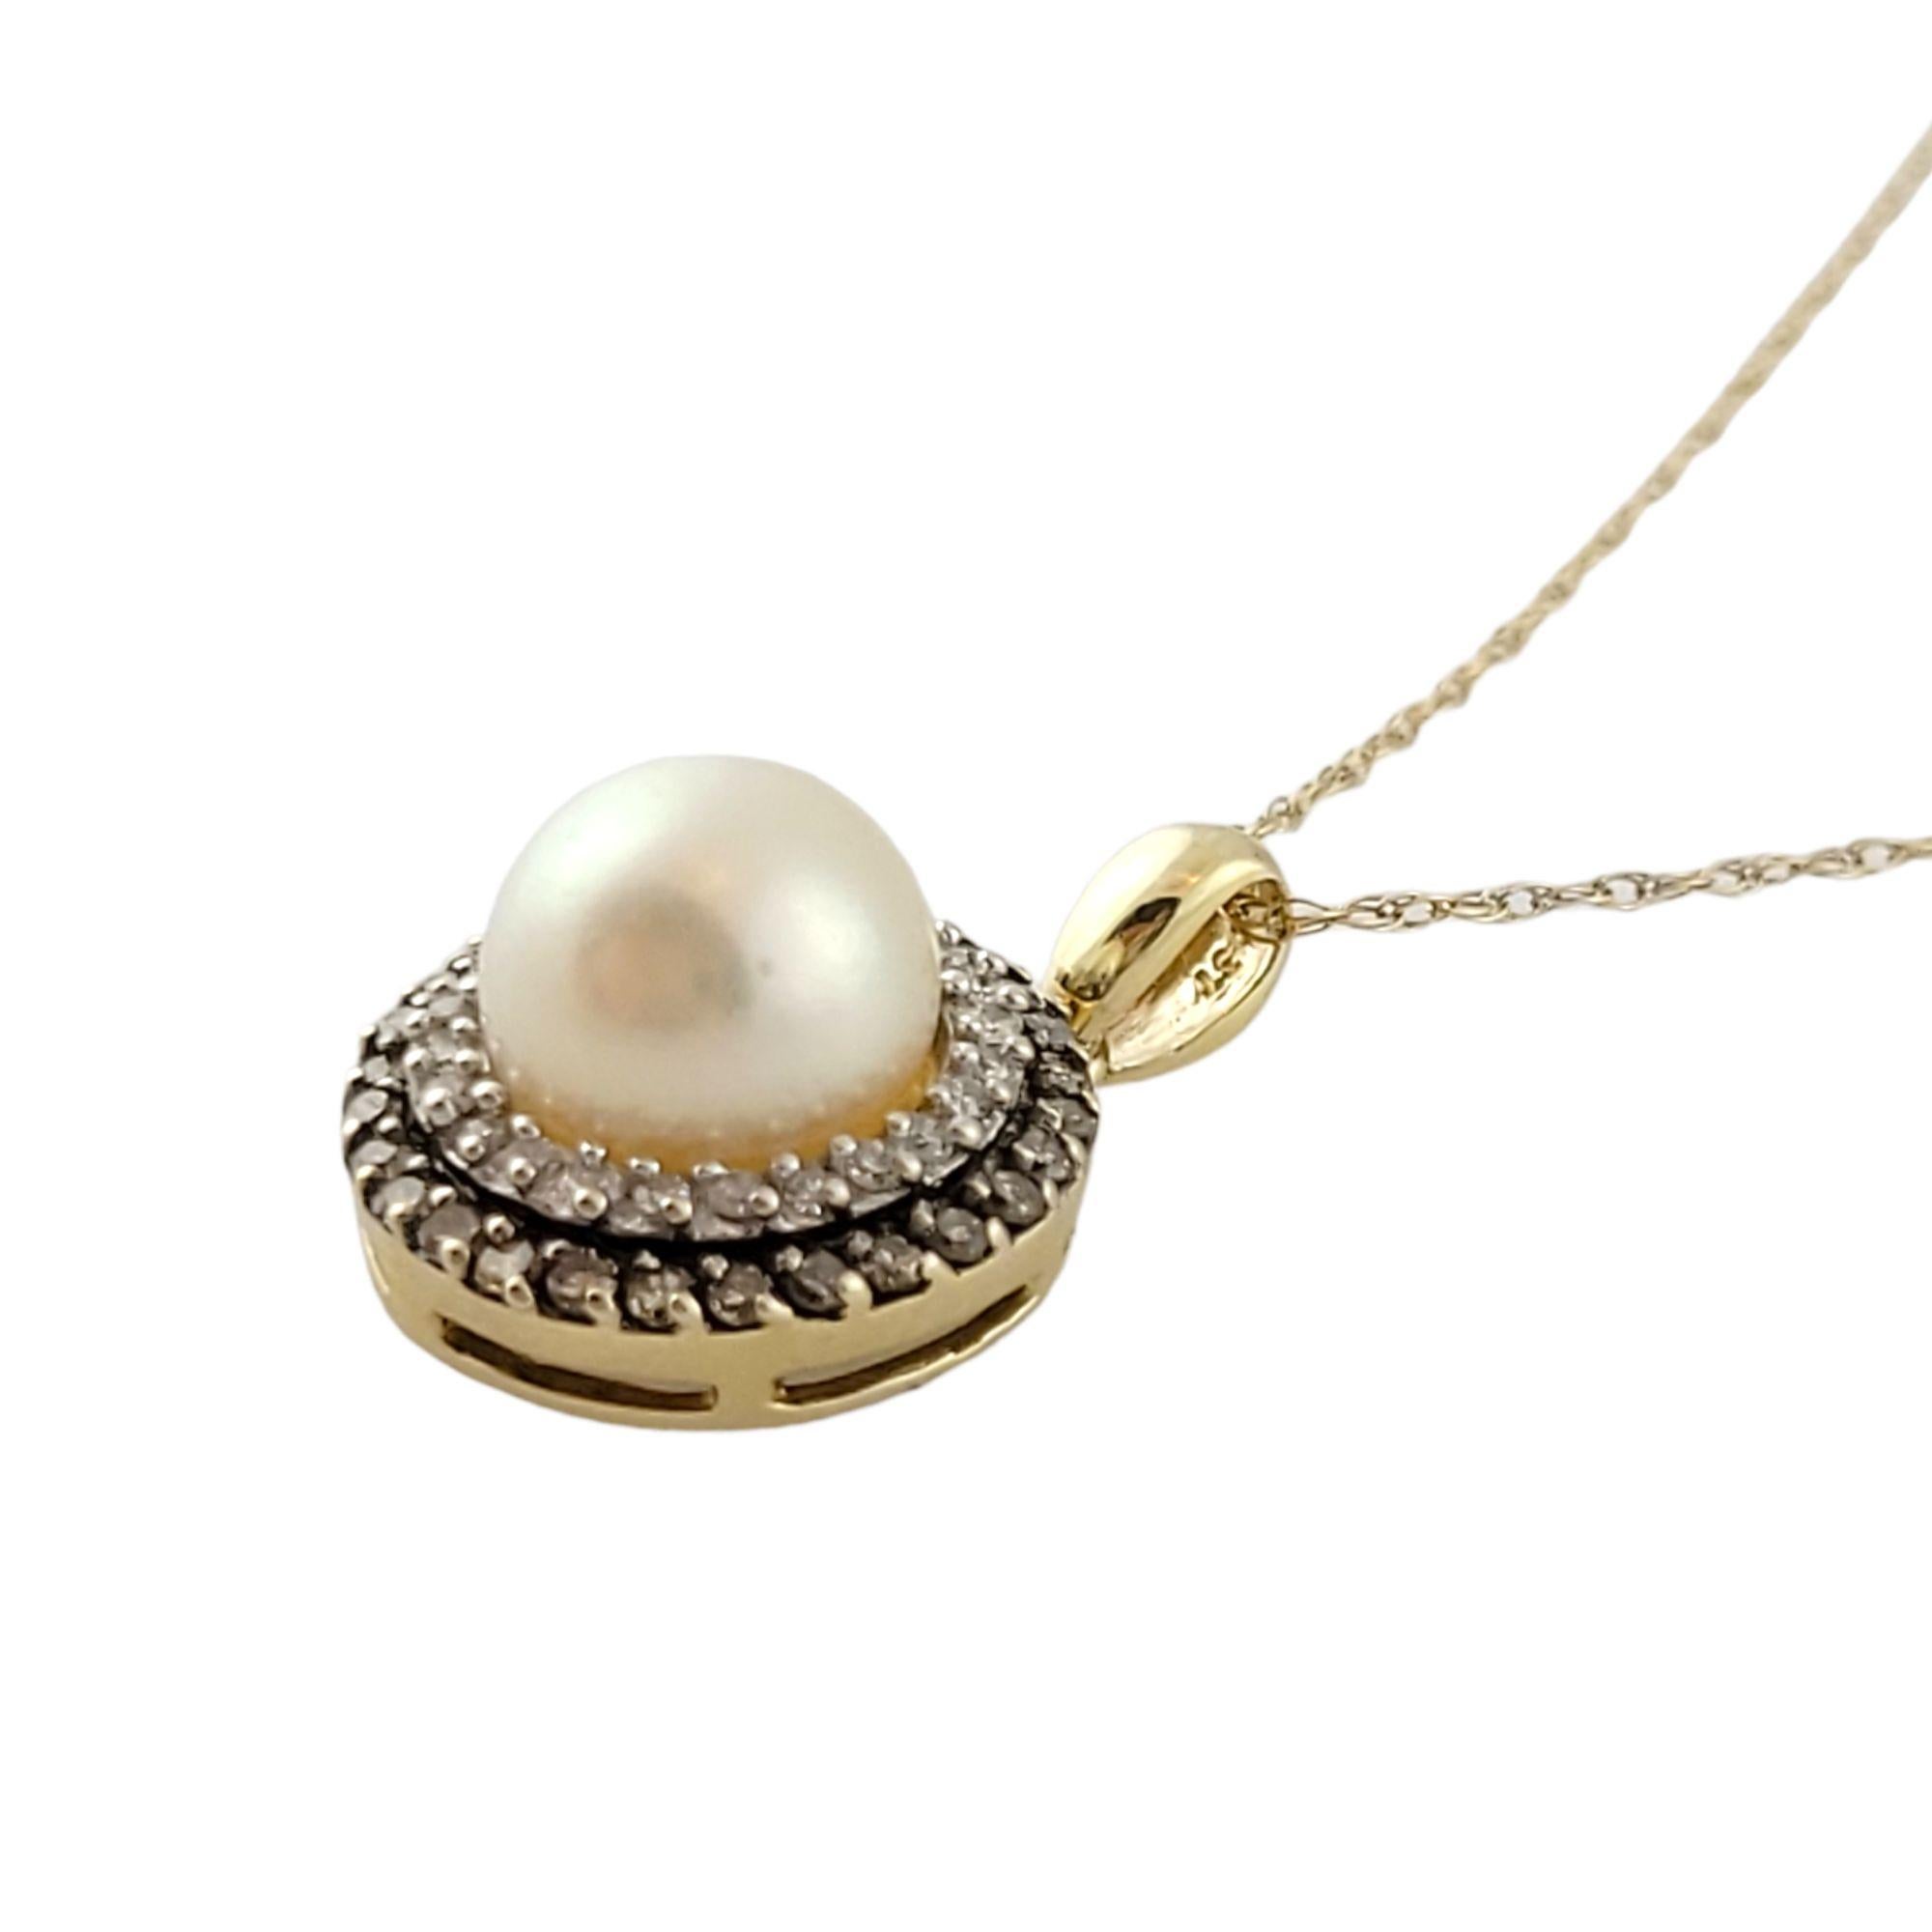 Vintage 10K Yellow Gold Pearl Diamond Pendant With Chain

This gorgeous 10k chain is paired with a gorgeous pearl pendant surrounded by 50 single cut diamond!
(1 pearl; 7.5mm)
(28 champagne diamonds)
(22 white diamonds)

Approximate total diamond